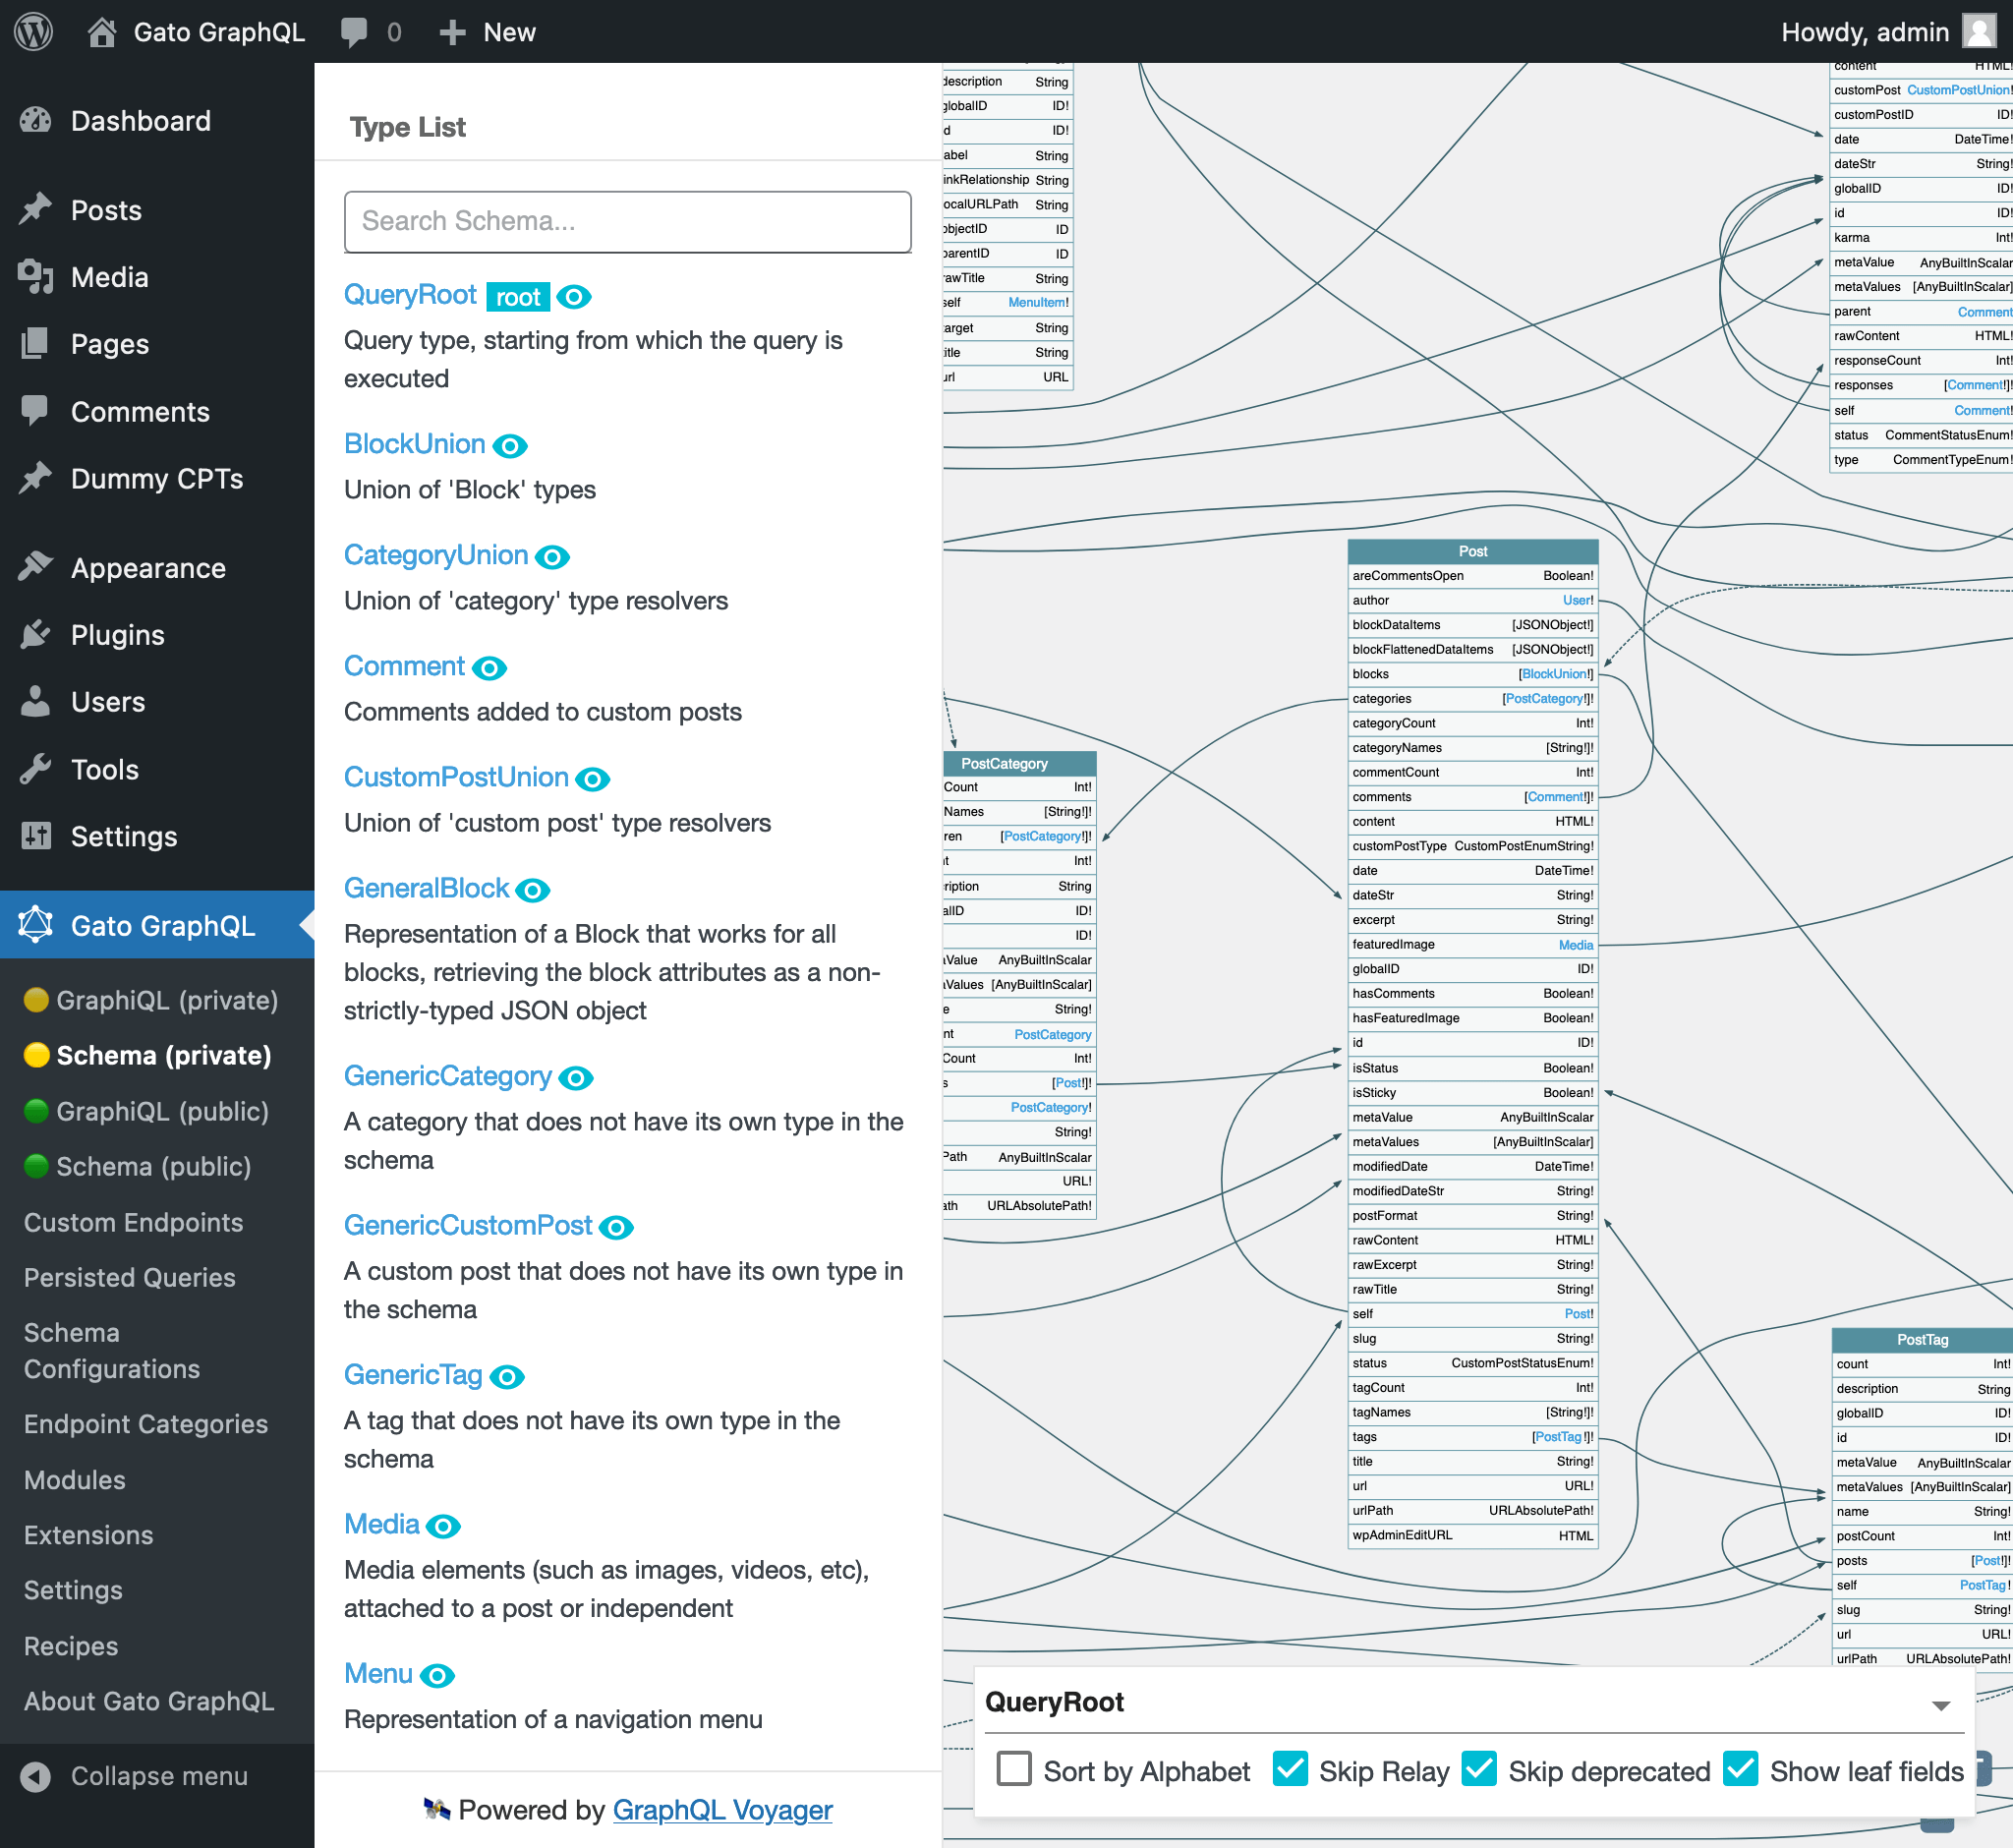 Interactively browse the GraphQL schema, exploring all connections among entities